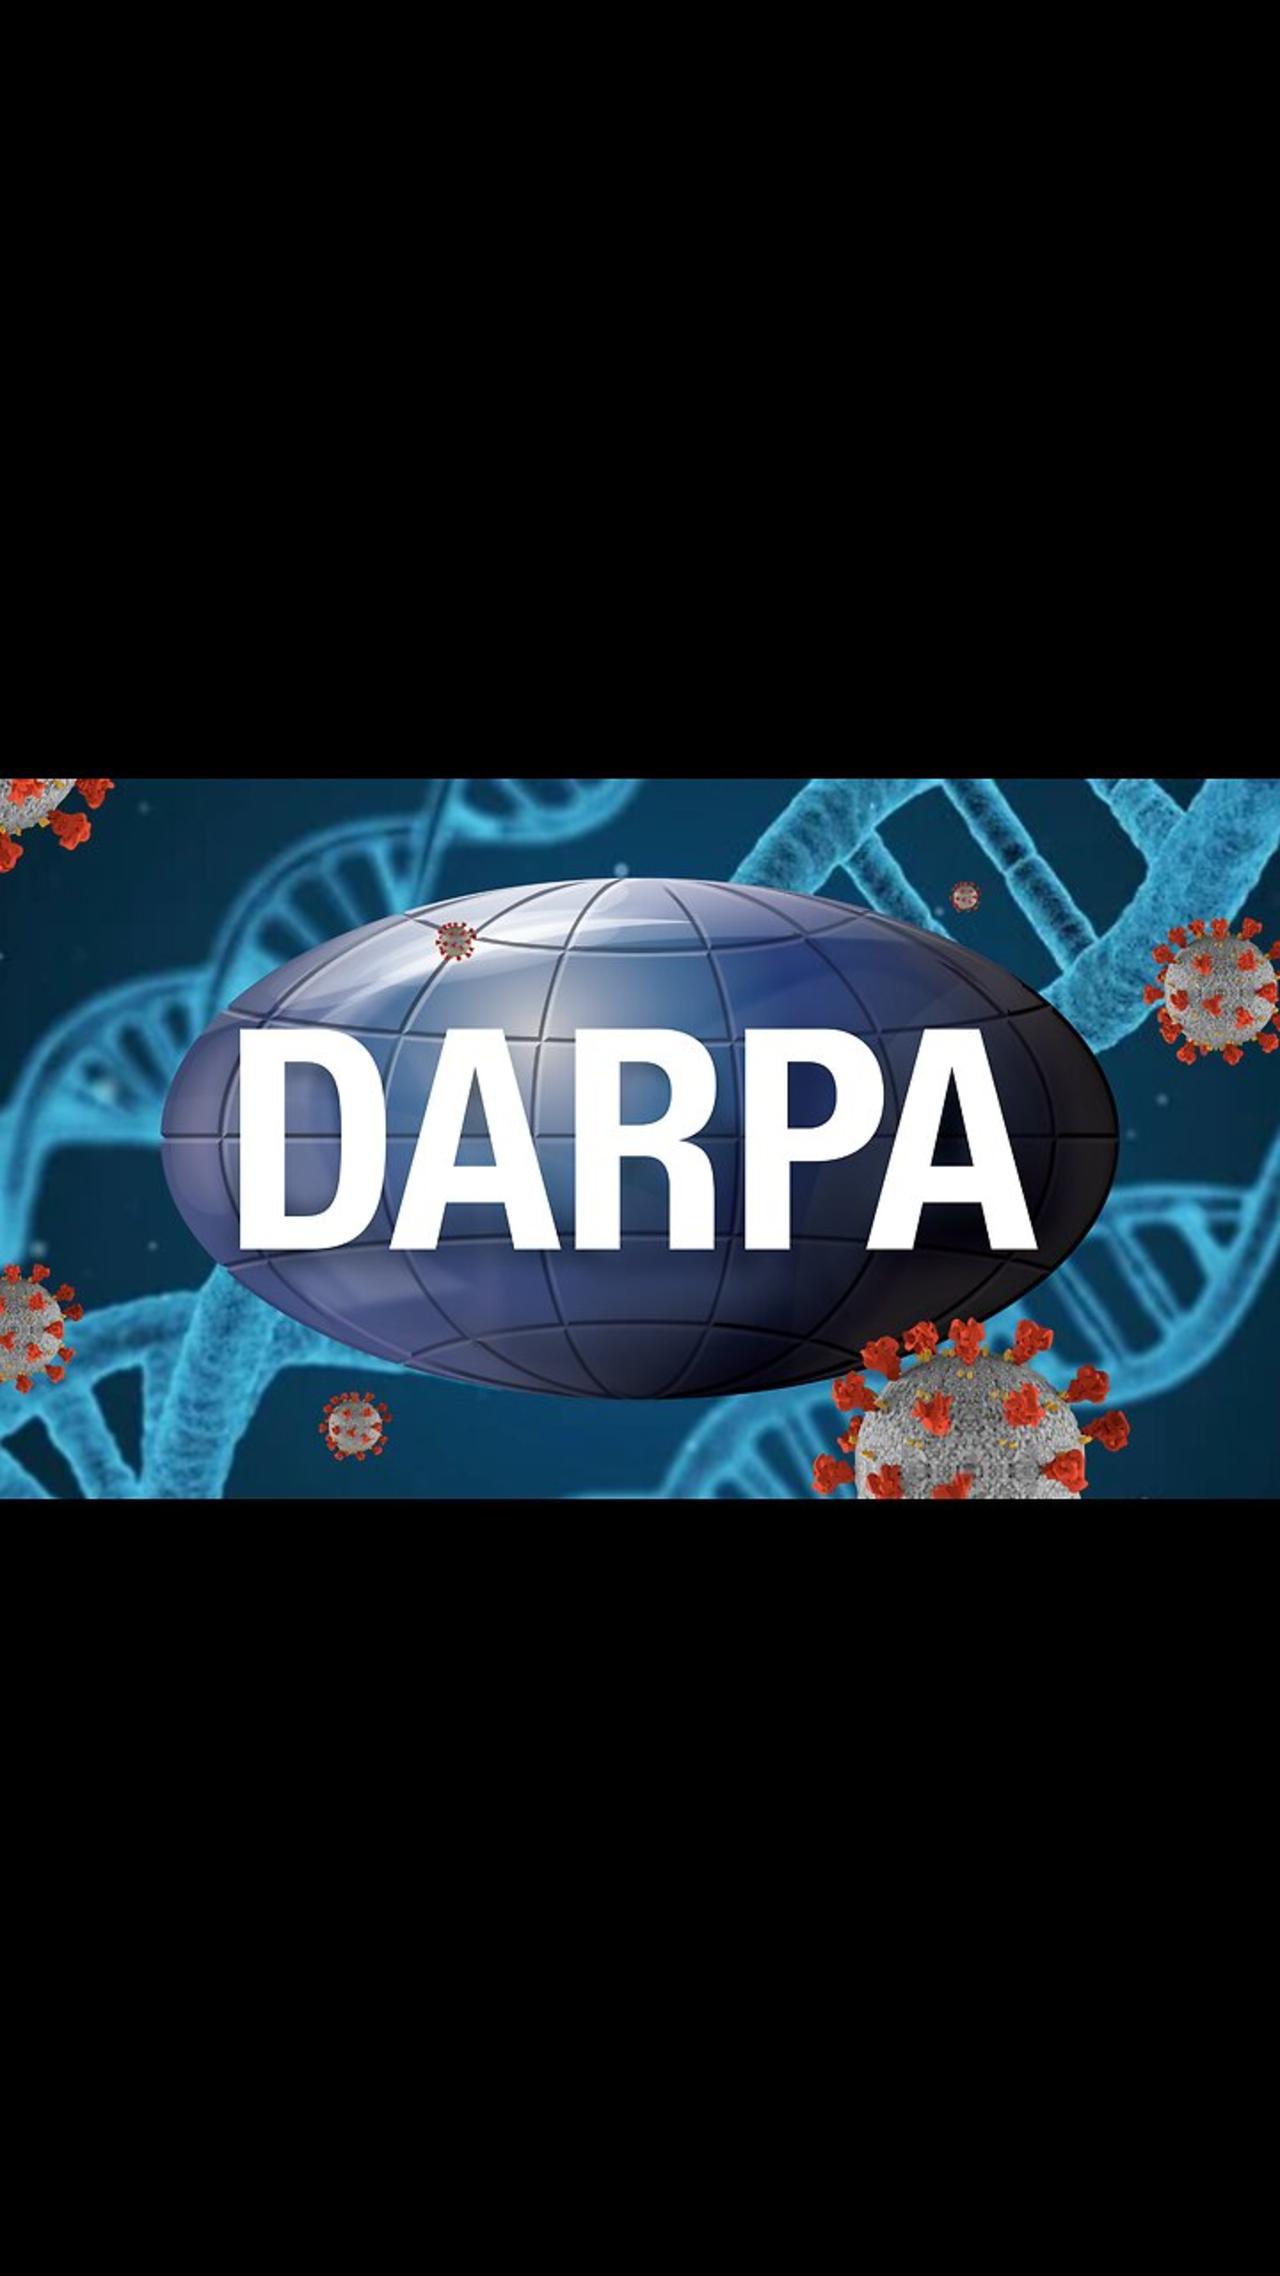 Caveman Science - Genetic Engineering with DARPA, Safe Genes, Gene Drives & the Callahan China Link